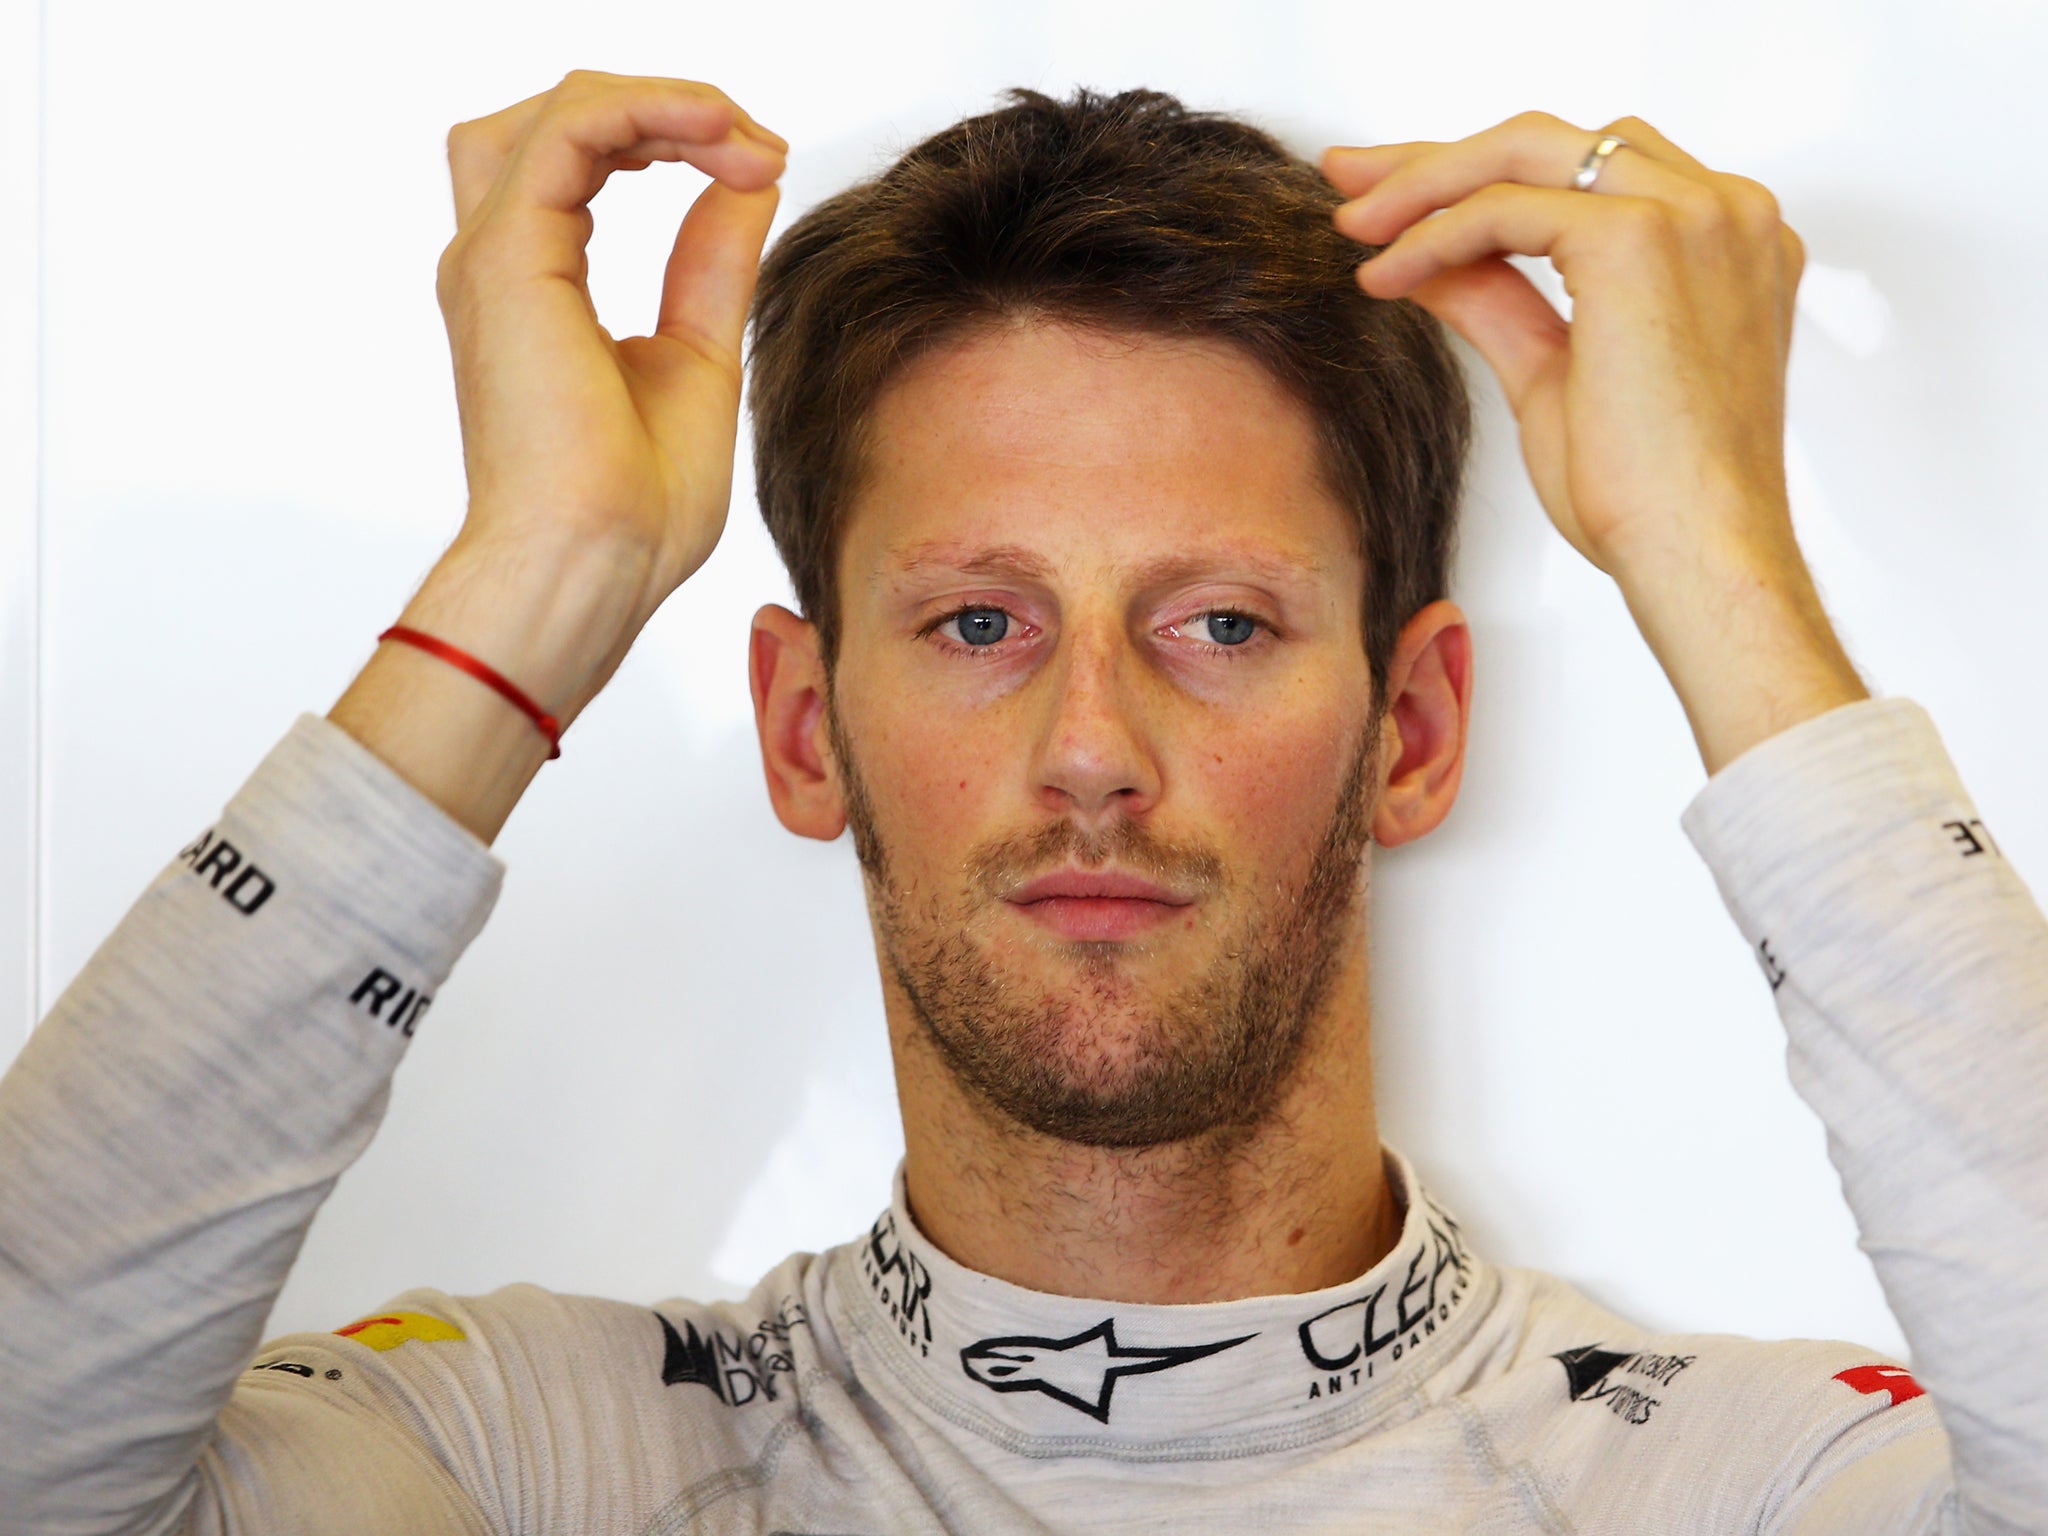 Romain Grosjean set the quickest time in first practice at the Abu Dhabi Grand Prix